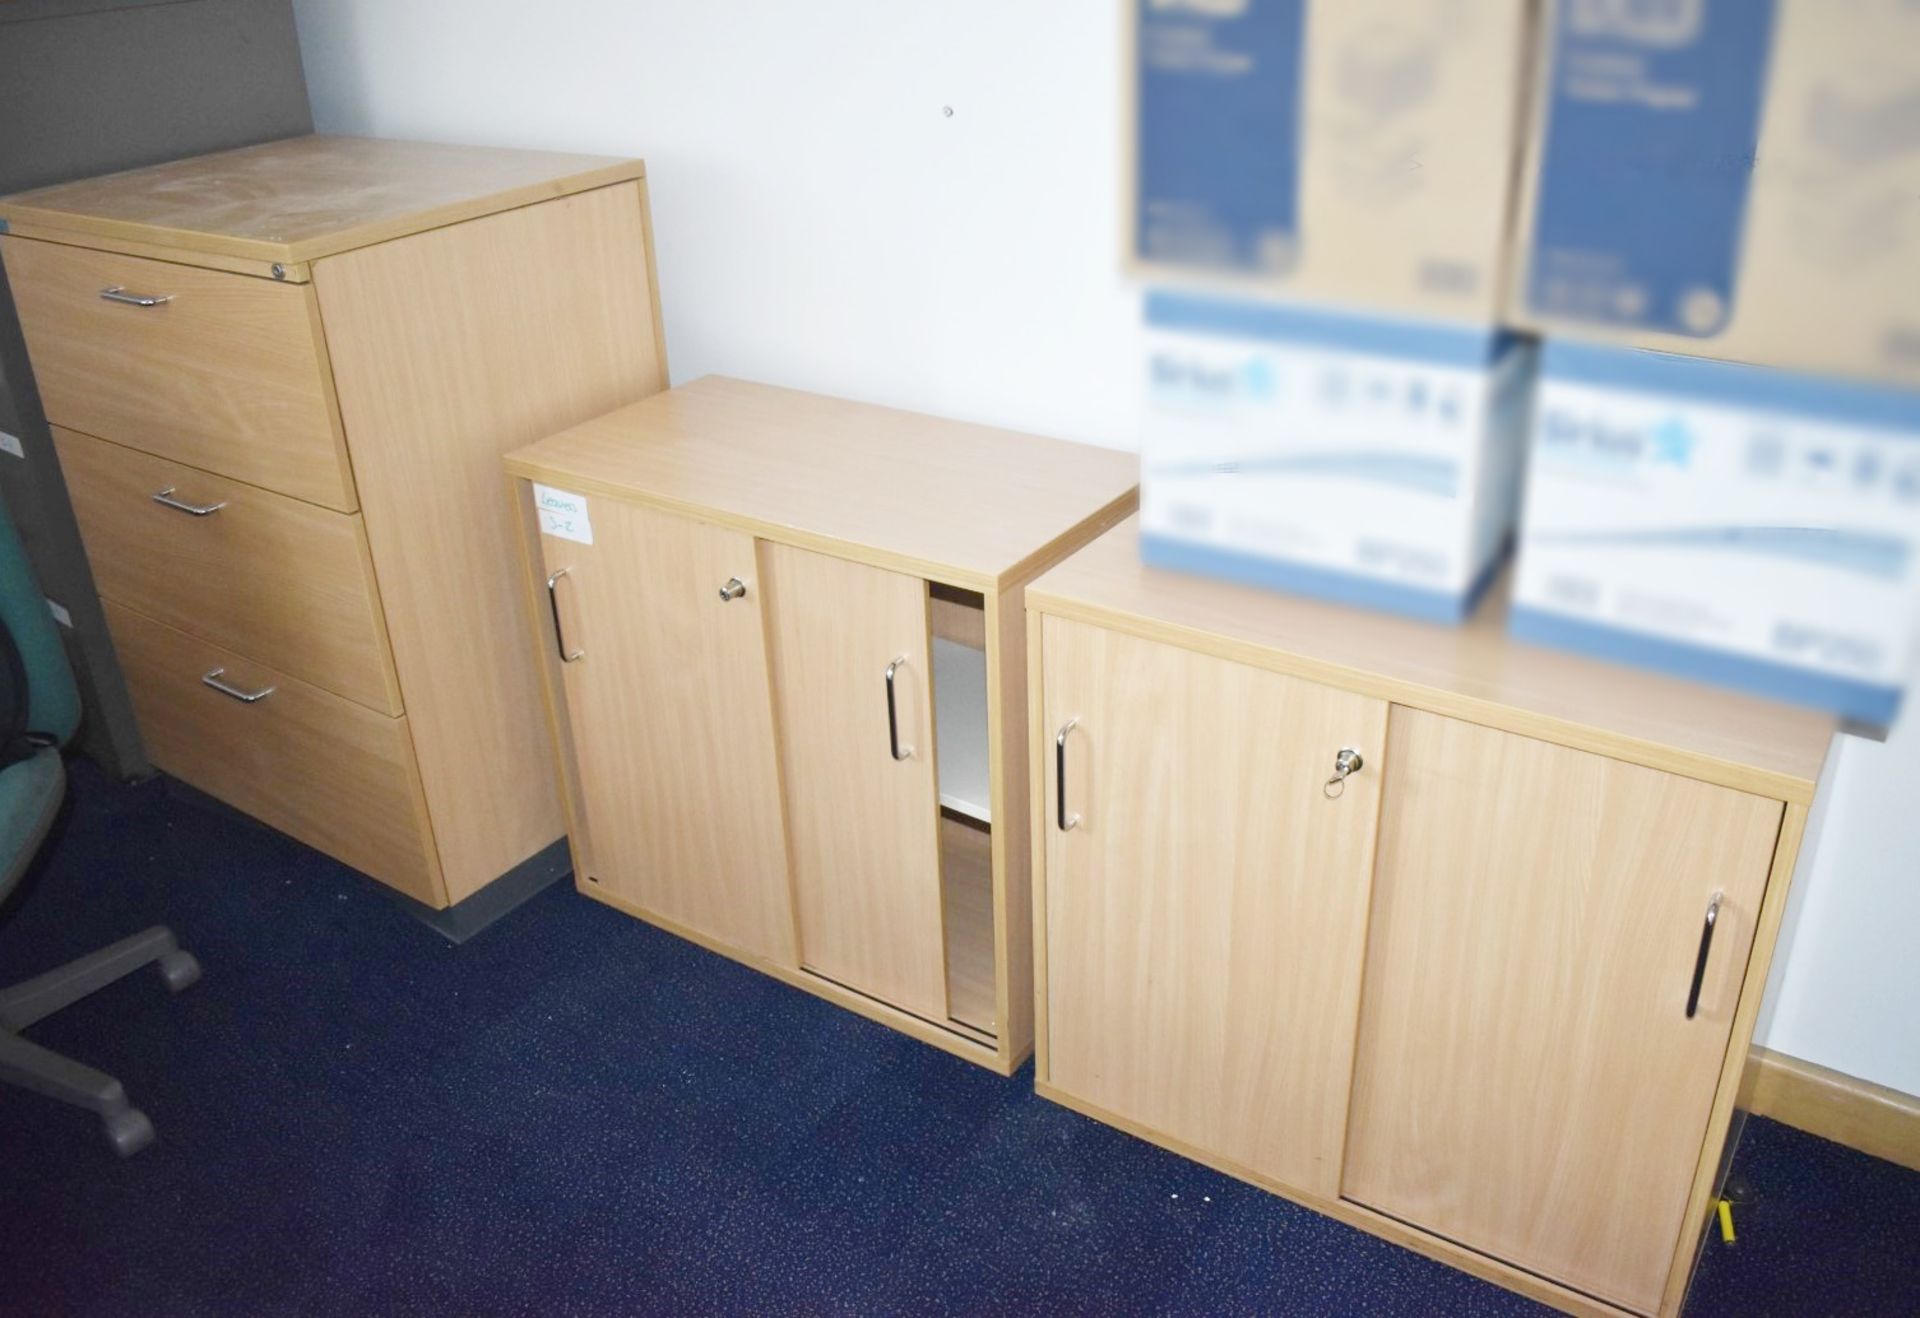 1 x Assorted Collection of Office Furniture - Includes 2 x 160cm Office Desks, 3 x Swivel Chairs, - Image 4 of 7